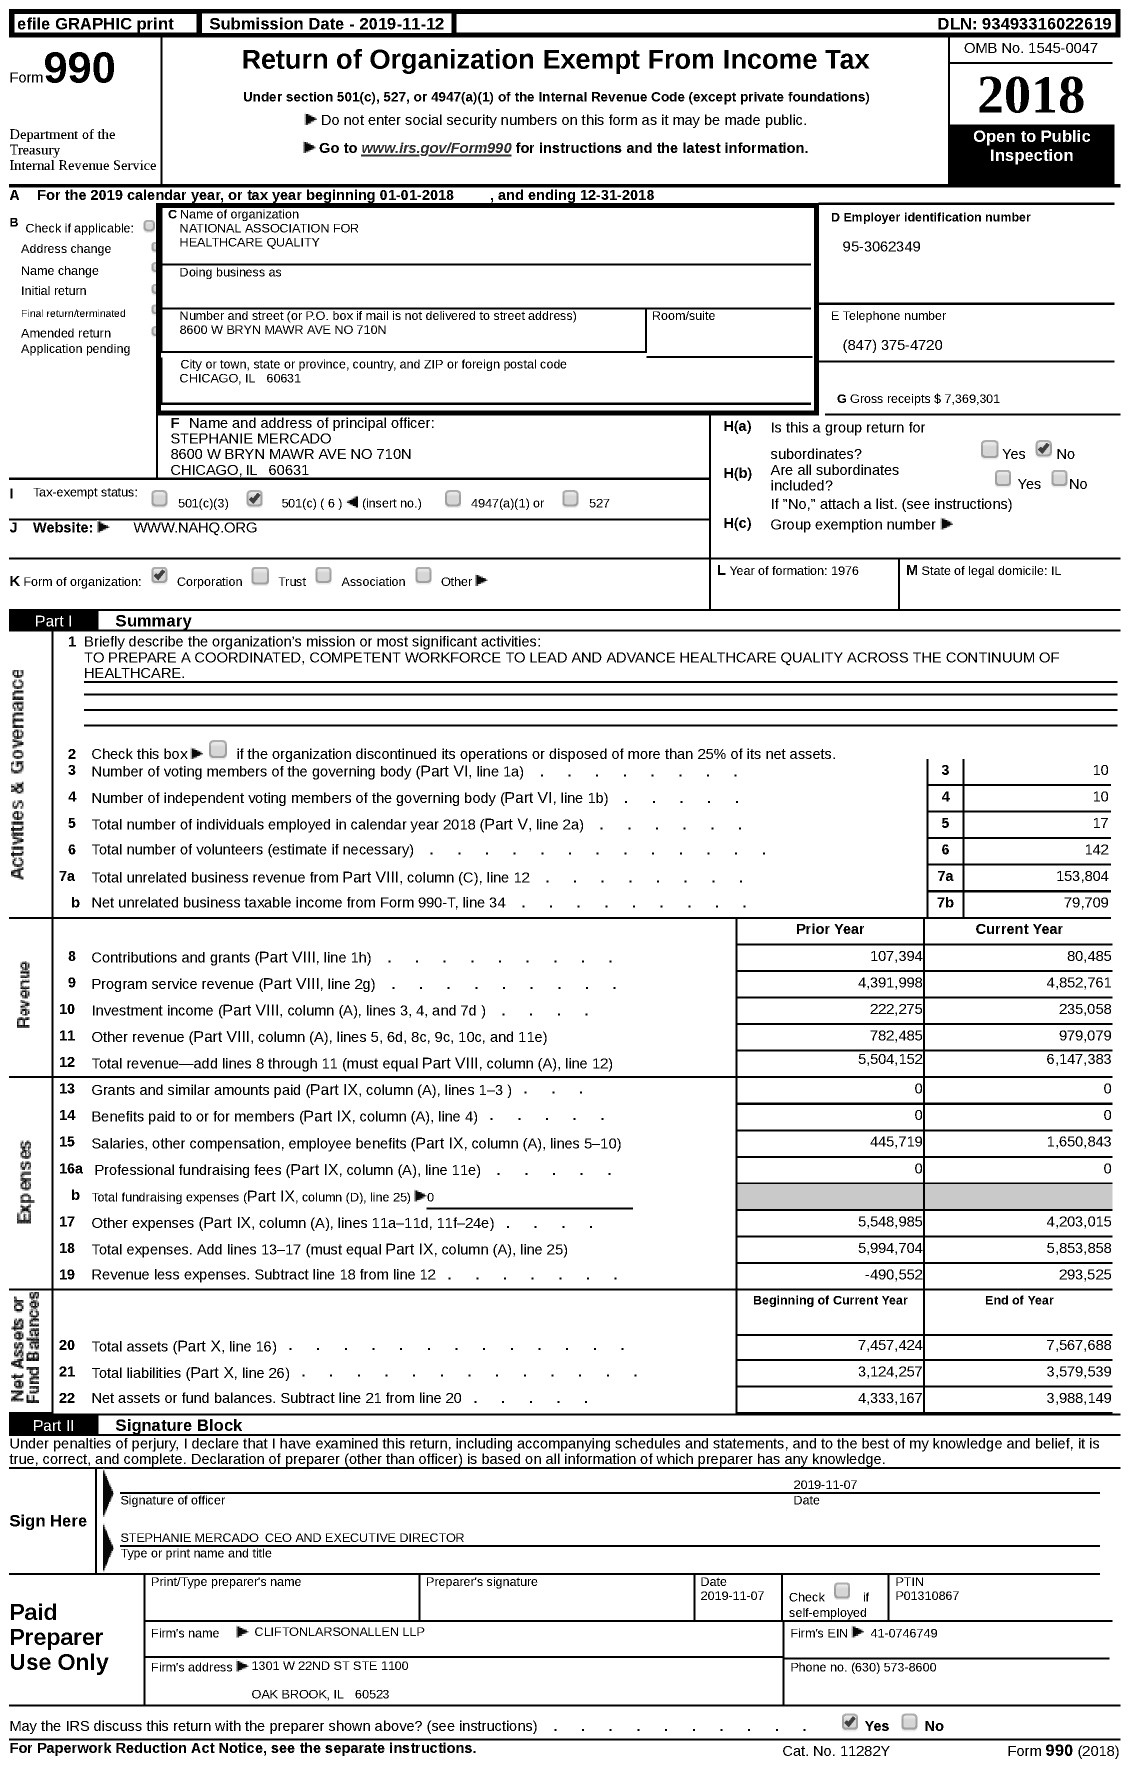 Image of first page of 2018 Form 990 for National Association for Healthcare Quality (NAHQ)